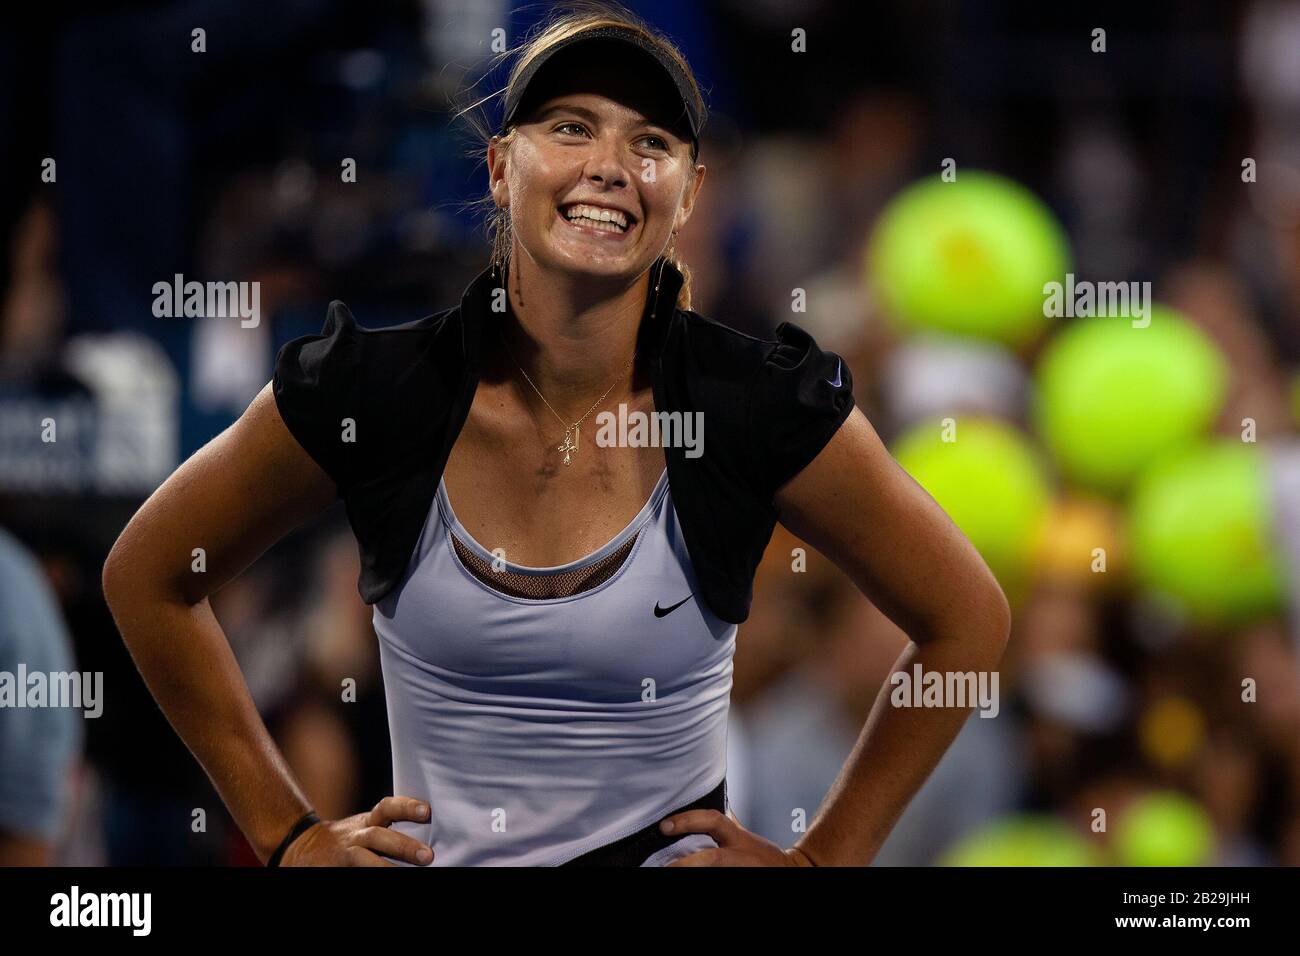 Maria Sharapova in action during her 2006 US Open victory at Flushing Meadows, New York.  Acknowledging the crowd after an earlier round victory.   Sharapova, a five time grand slam champion, and one of the highest earning female athletes, announced her retirement from competitive tennis  this week. Stock Photo